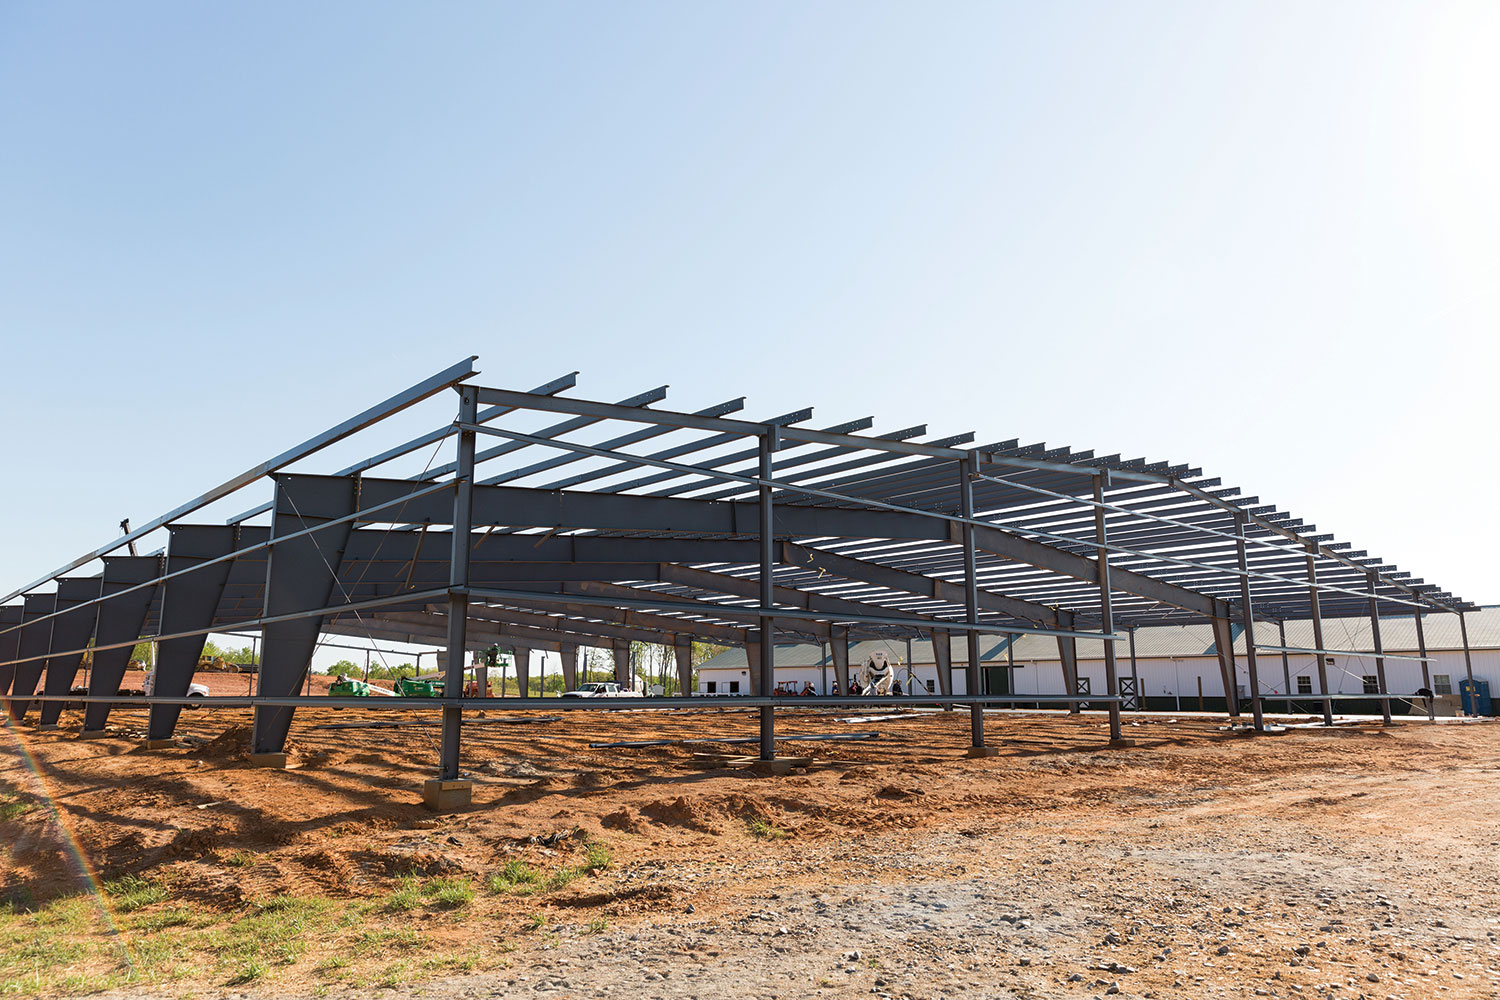 Construction of a steel arena at Liberty's Equestrian Center.